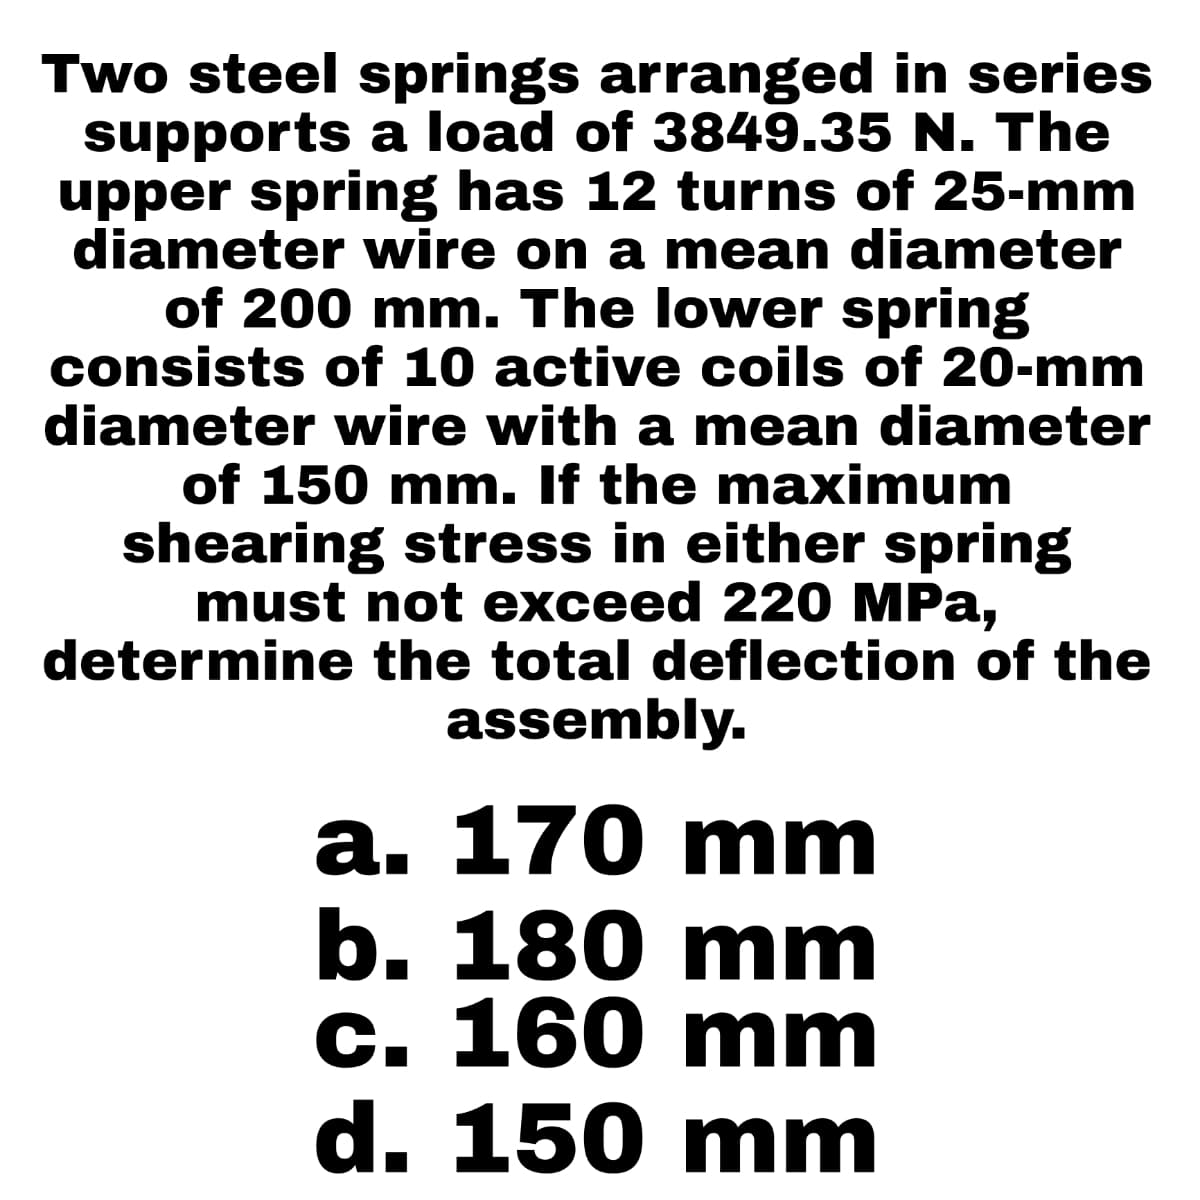 Two steel springs arranged in series
supports a load of 3849.35 N. The
upper spring has 12 turns of 25-mm
diameter wire on a mean diameter
of 200 mm. The lower spring
consists of 10 active coils of 20-mm
diameter wire with a mean diameter
of 150 mm. If the maximum
shearing stress in either spring
must not exceed 220 MPa,
determine the total deflection of the
assembly.
a. 170 mm
b. 180 mm
c. 160 mm
d. 150 mm